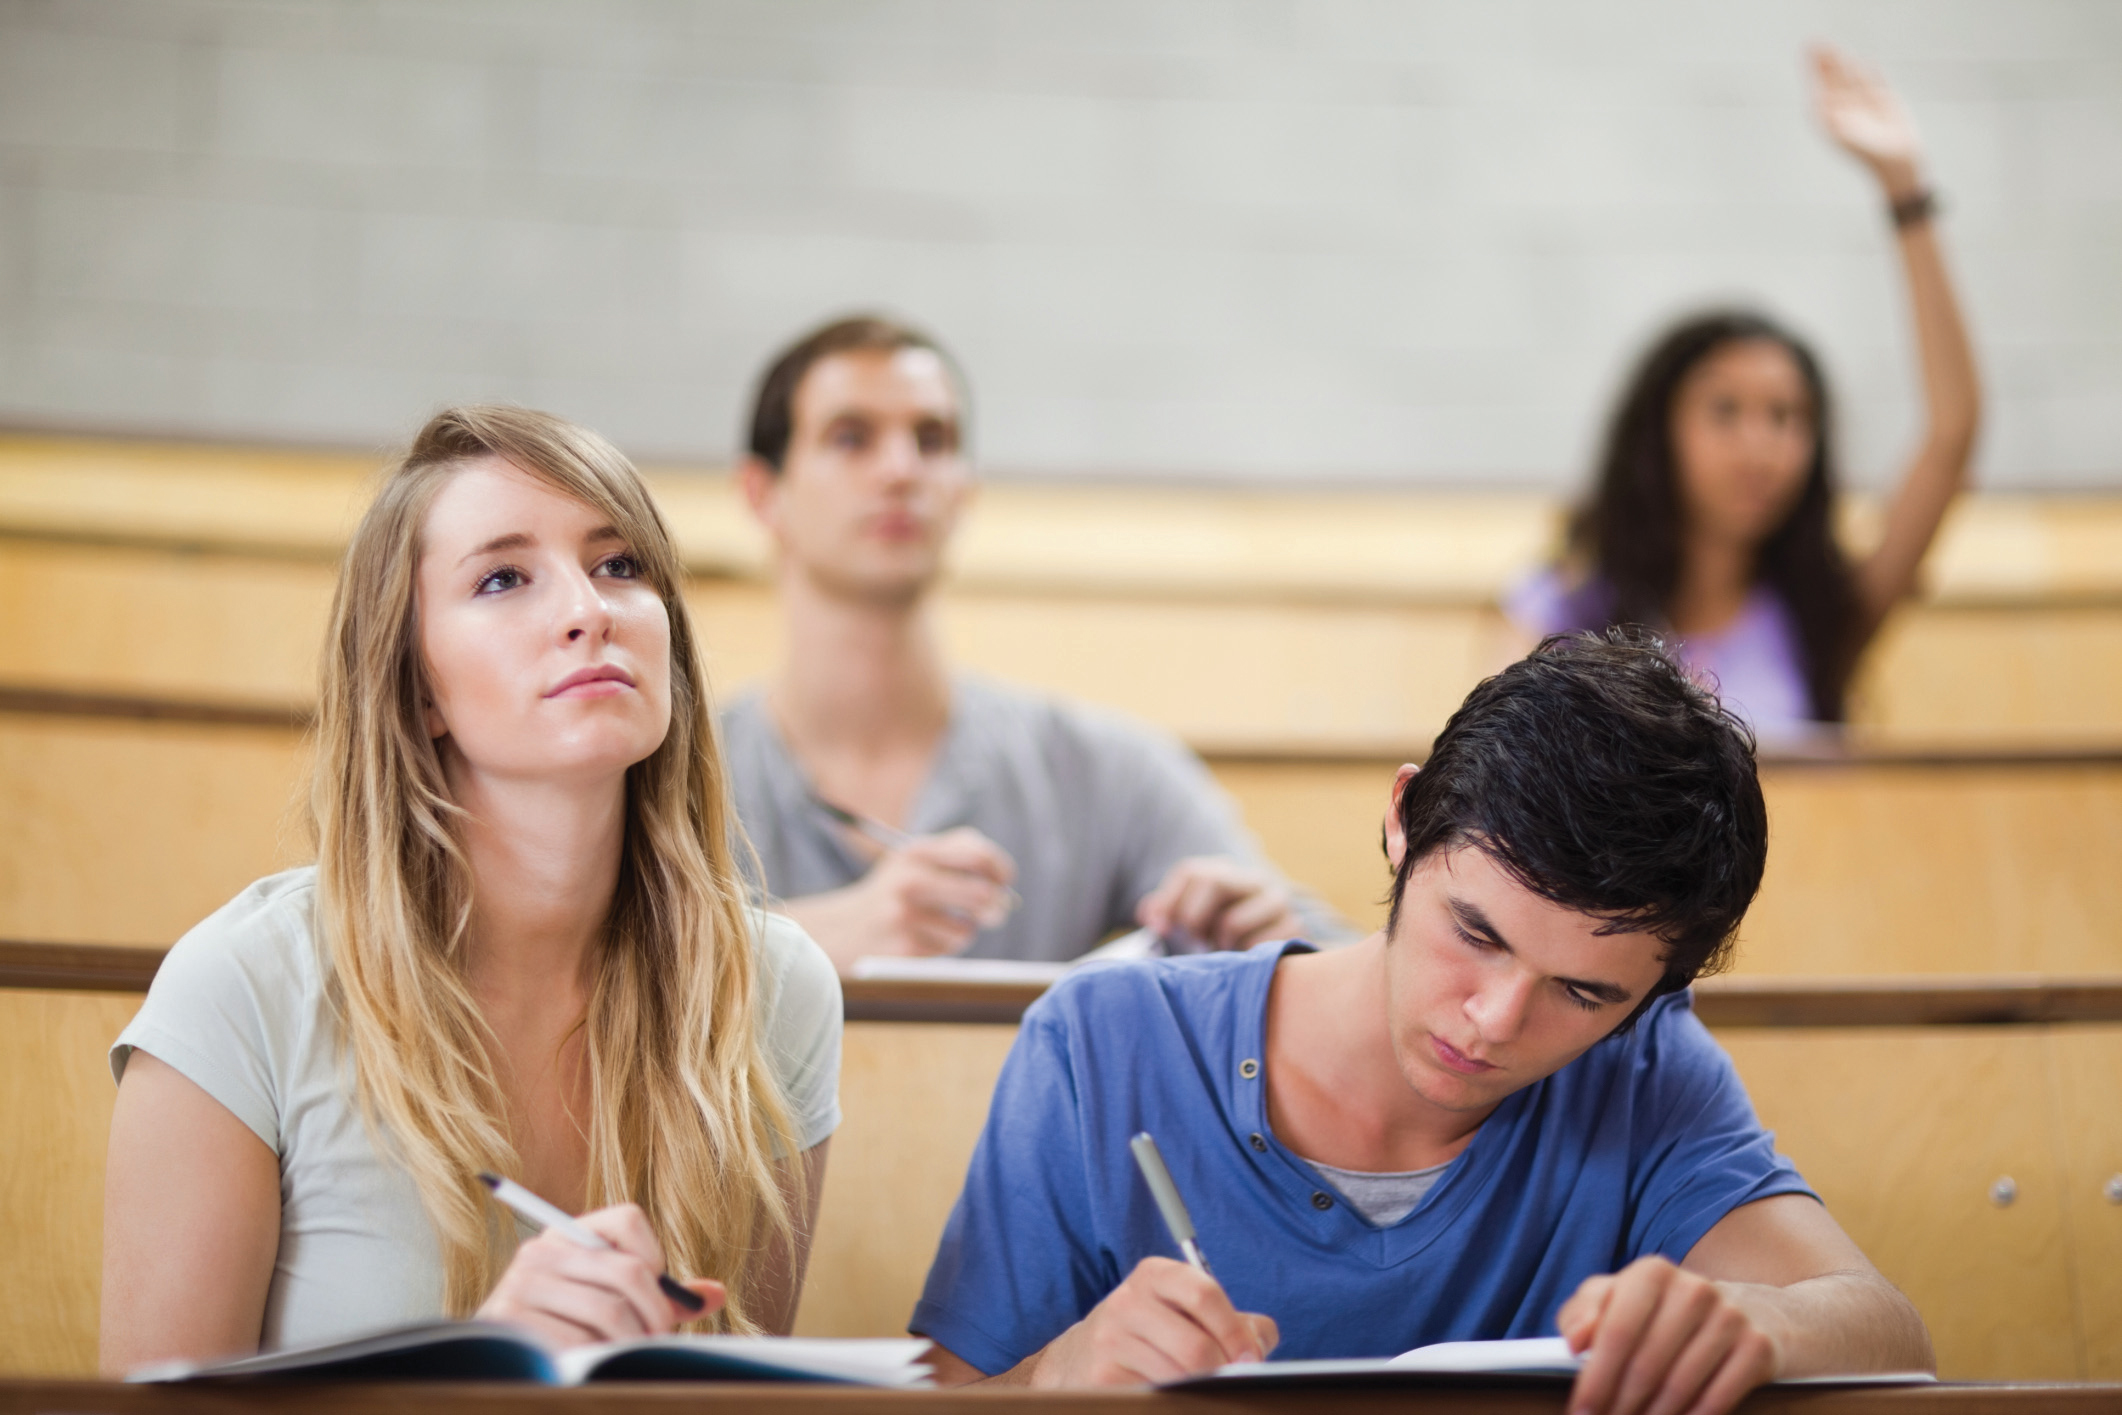 Two students actively listening to an instructor.